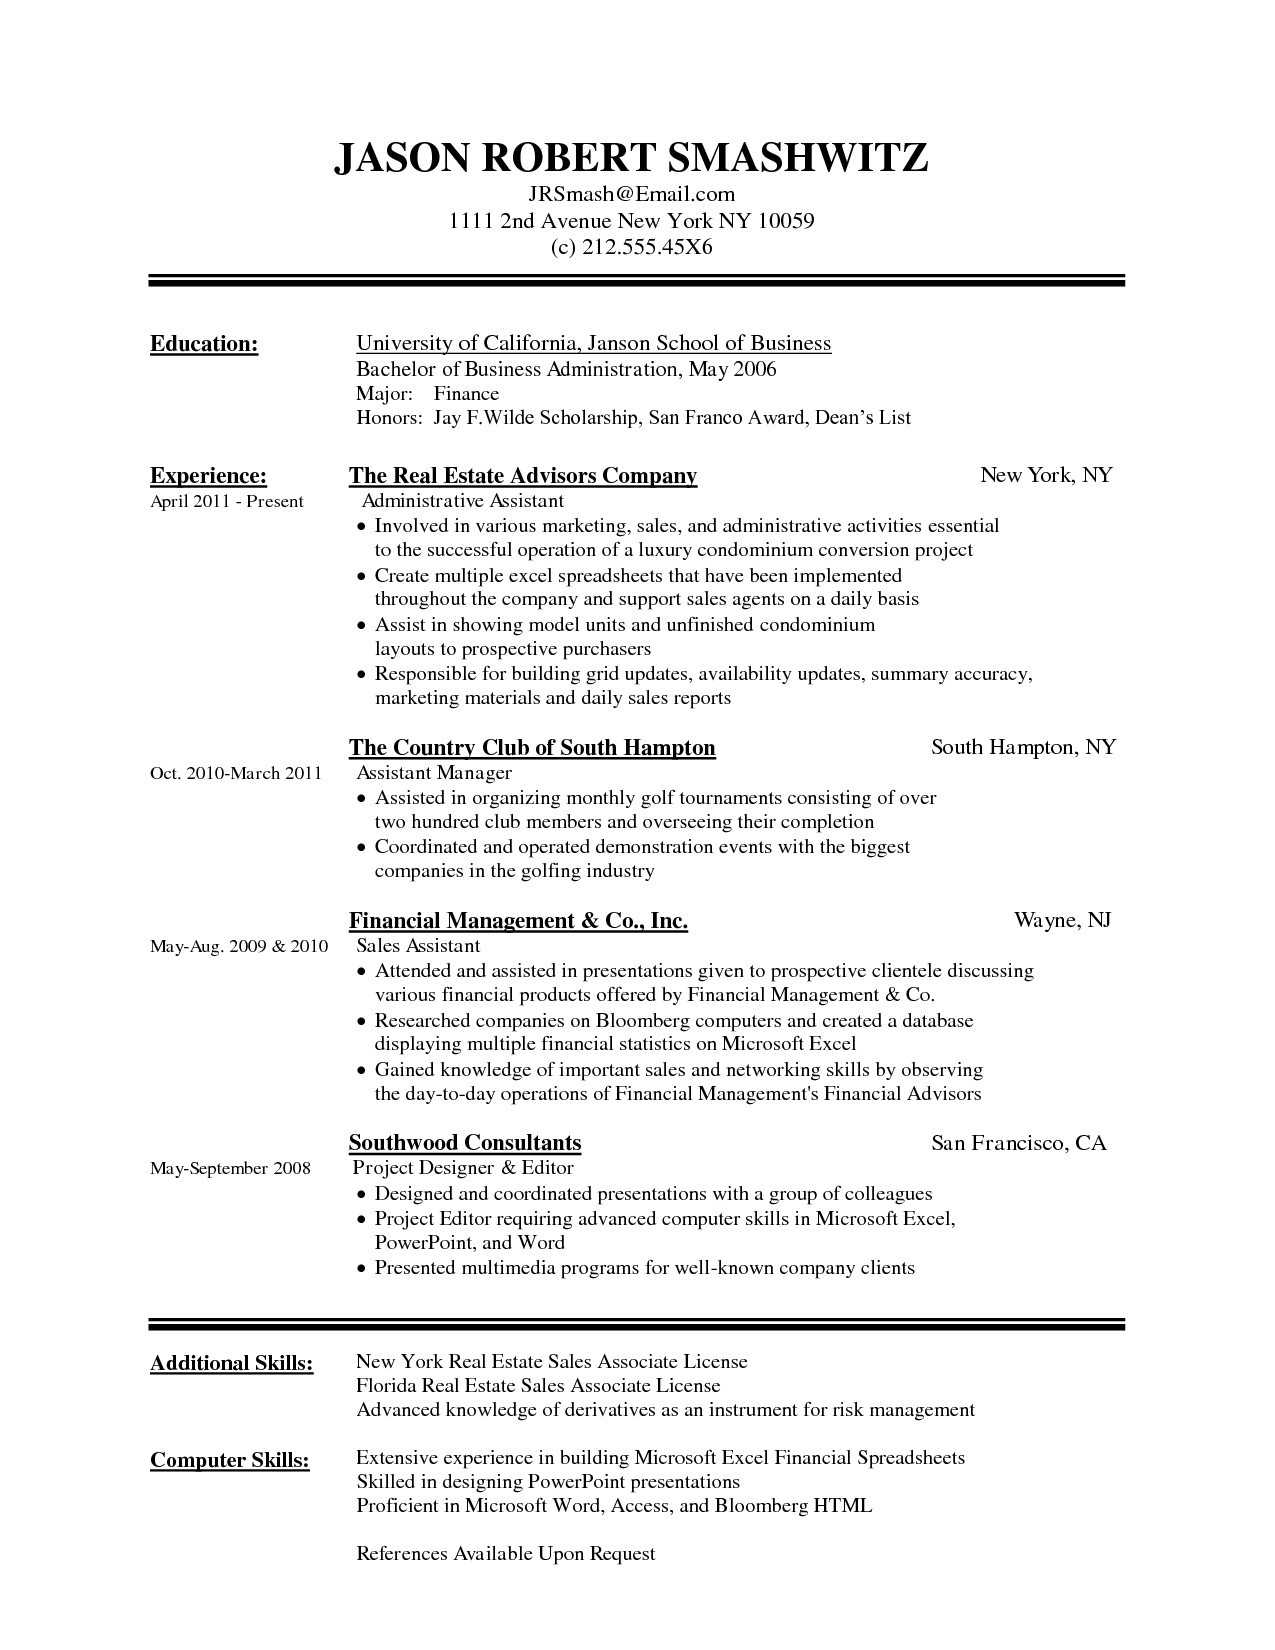 Awesome Resume Templates For Word 2010 – Superkepo In Resume Templates Microsoft Word 2010